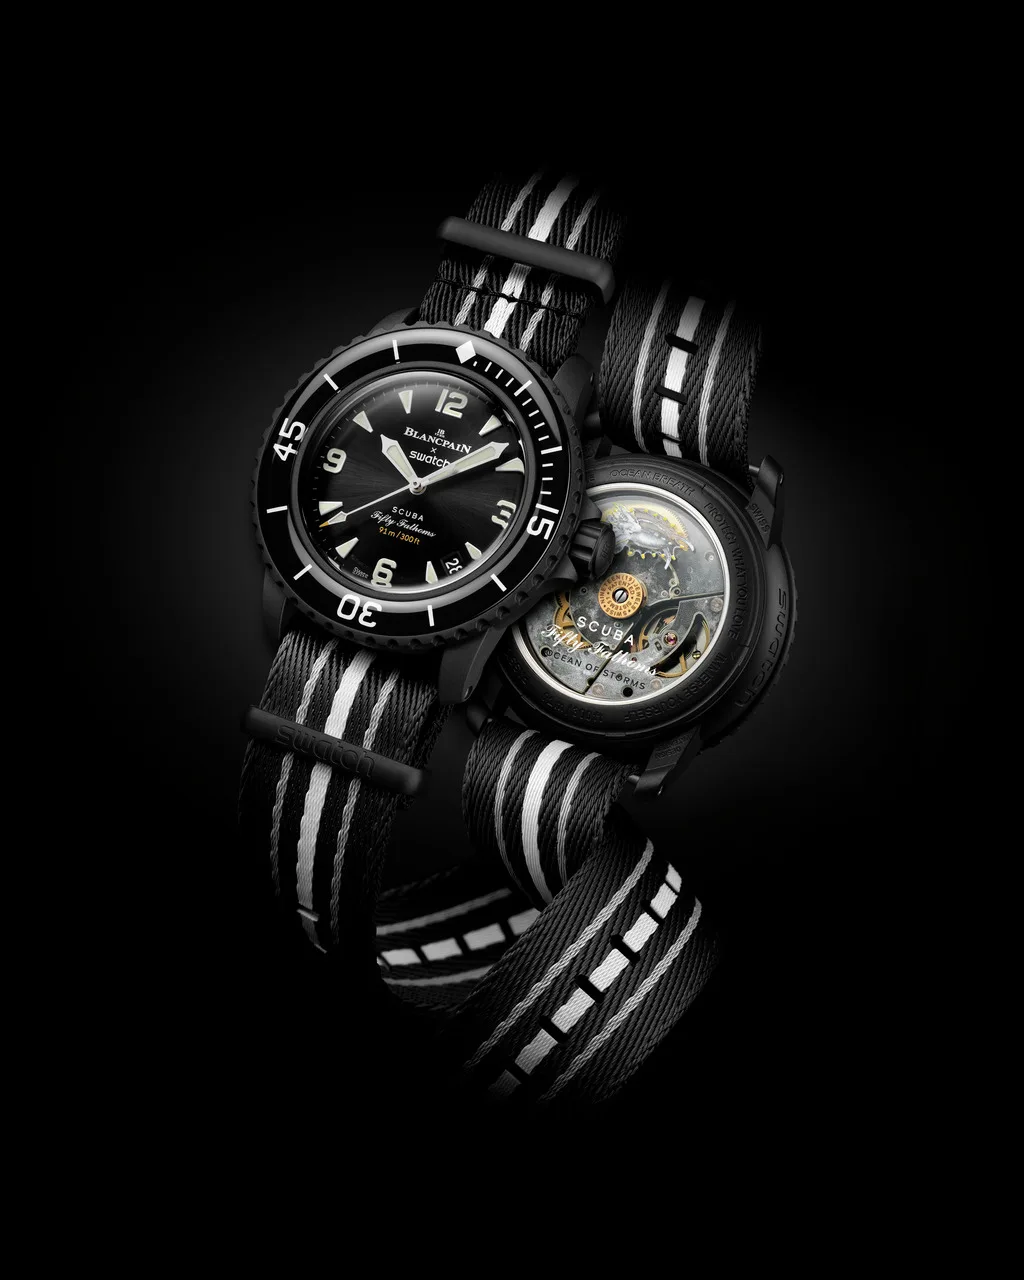 Blancpain X Swatch Bioceramic Scuba Fifty Fathoms discovers a sixth ocean, Ocean of Storms